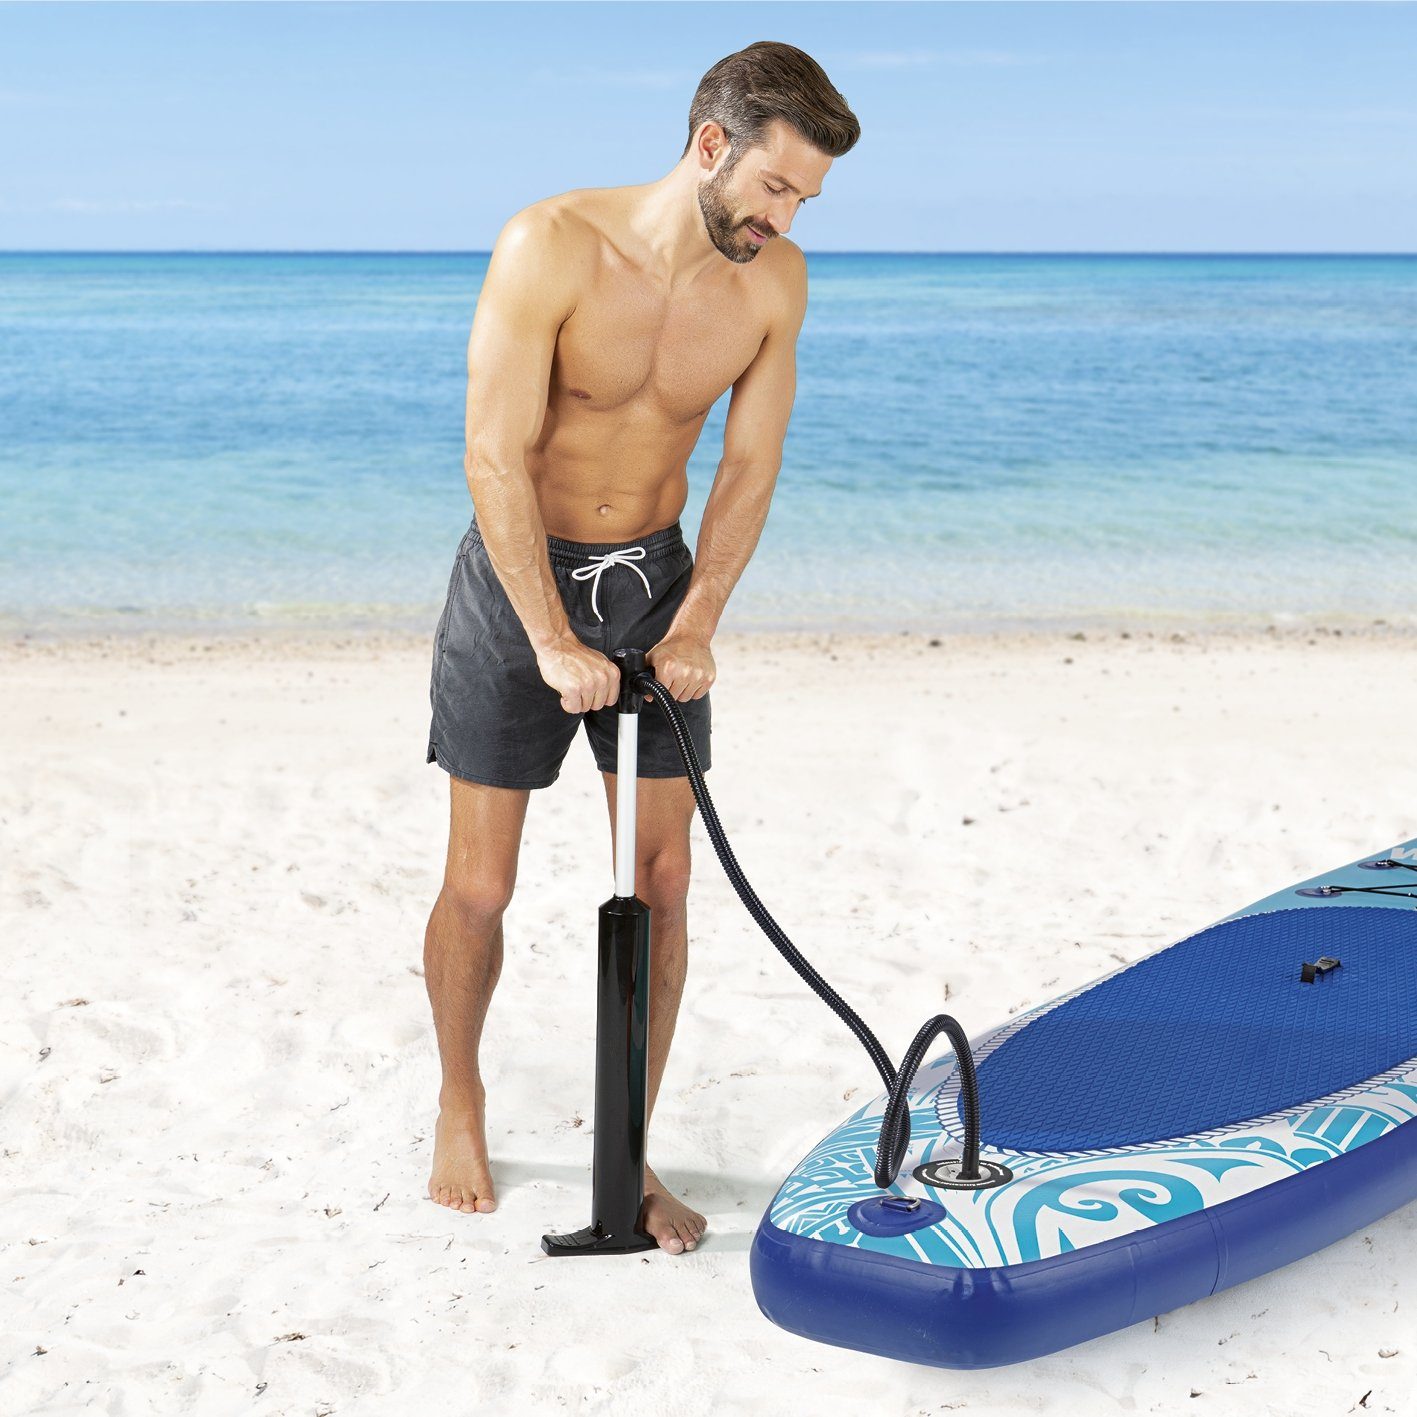 MAXXMEE Inflatable SUP-Board, 300 cm, Set 110kg, Board inkl. Paddle-Board Paddle Komplett up Paddling Paddel Stand Board blau/türkis SUP Stand-Up